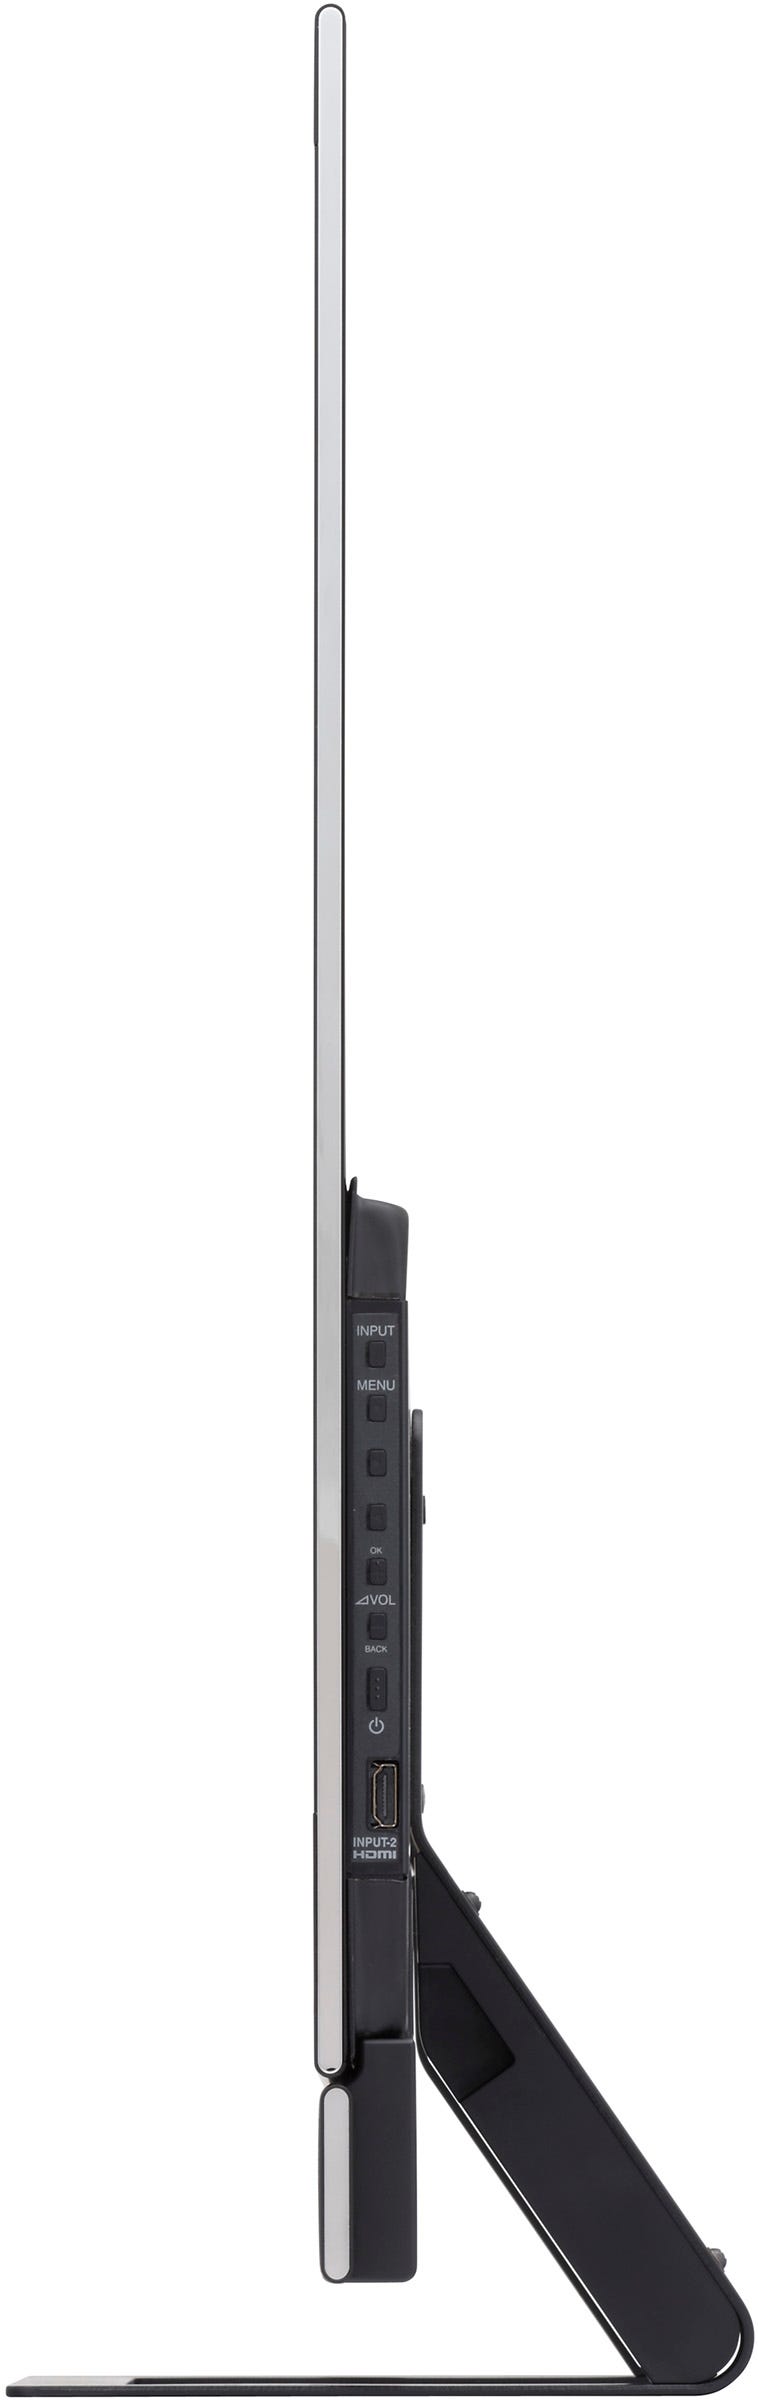 The JVC LT-32WX50 is just a quarter of an inch thick at its slimmest point.